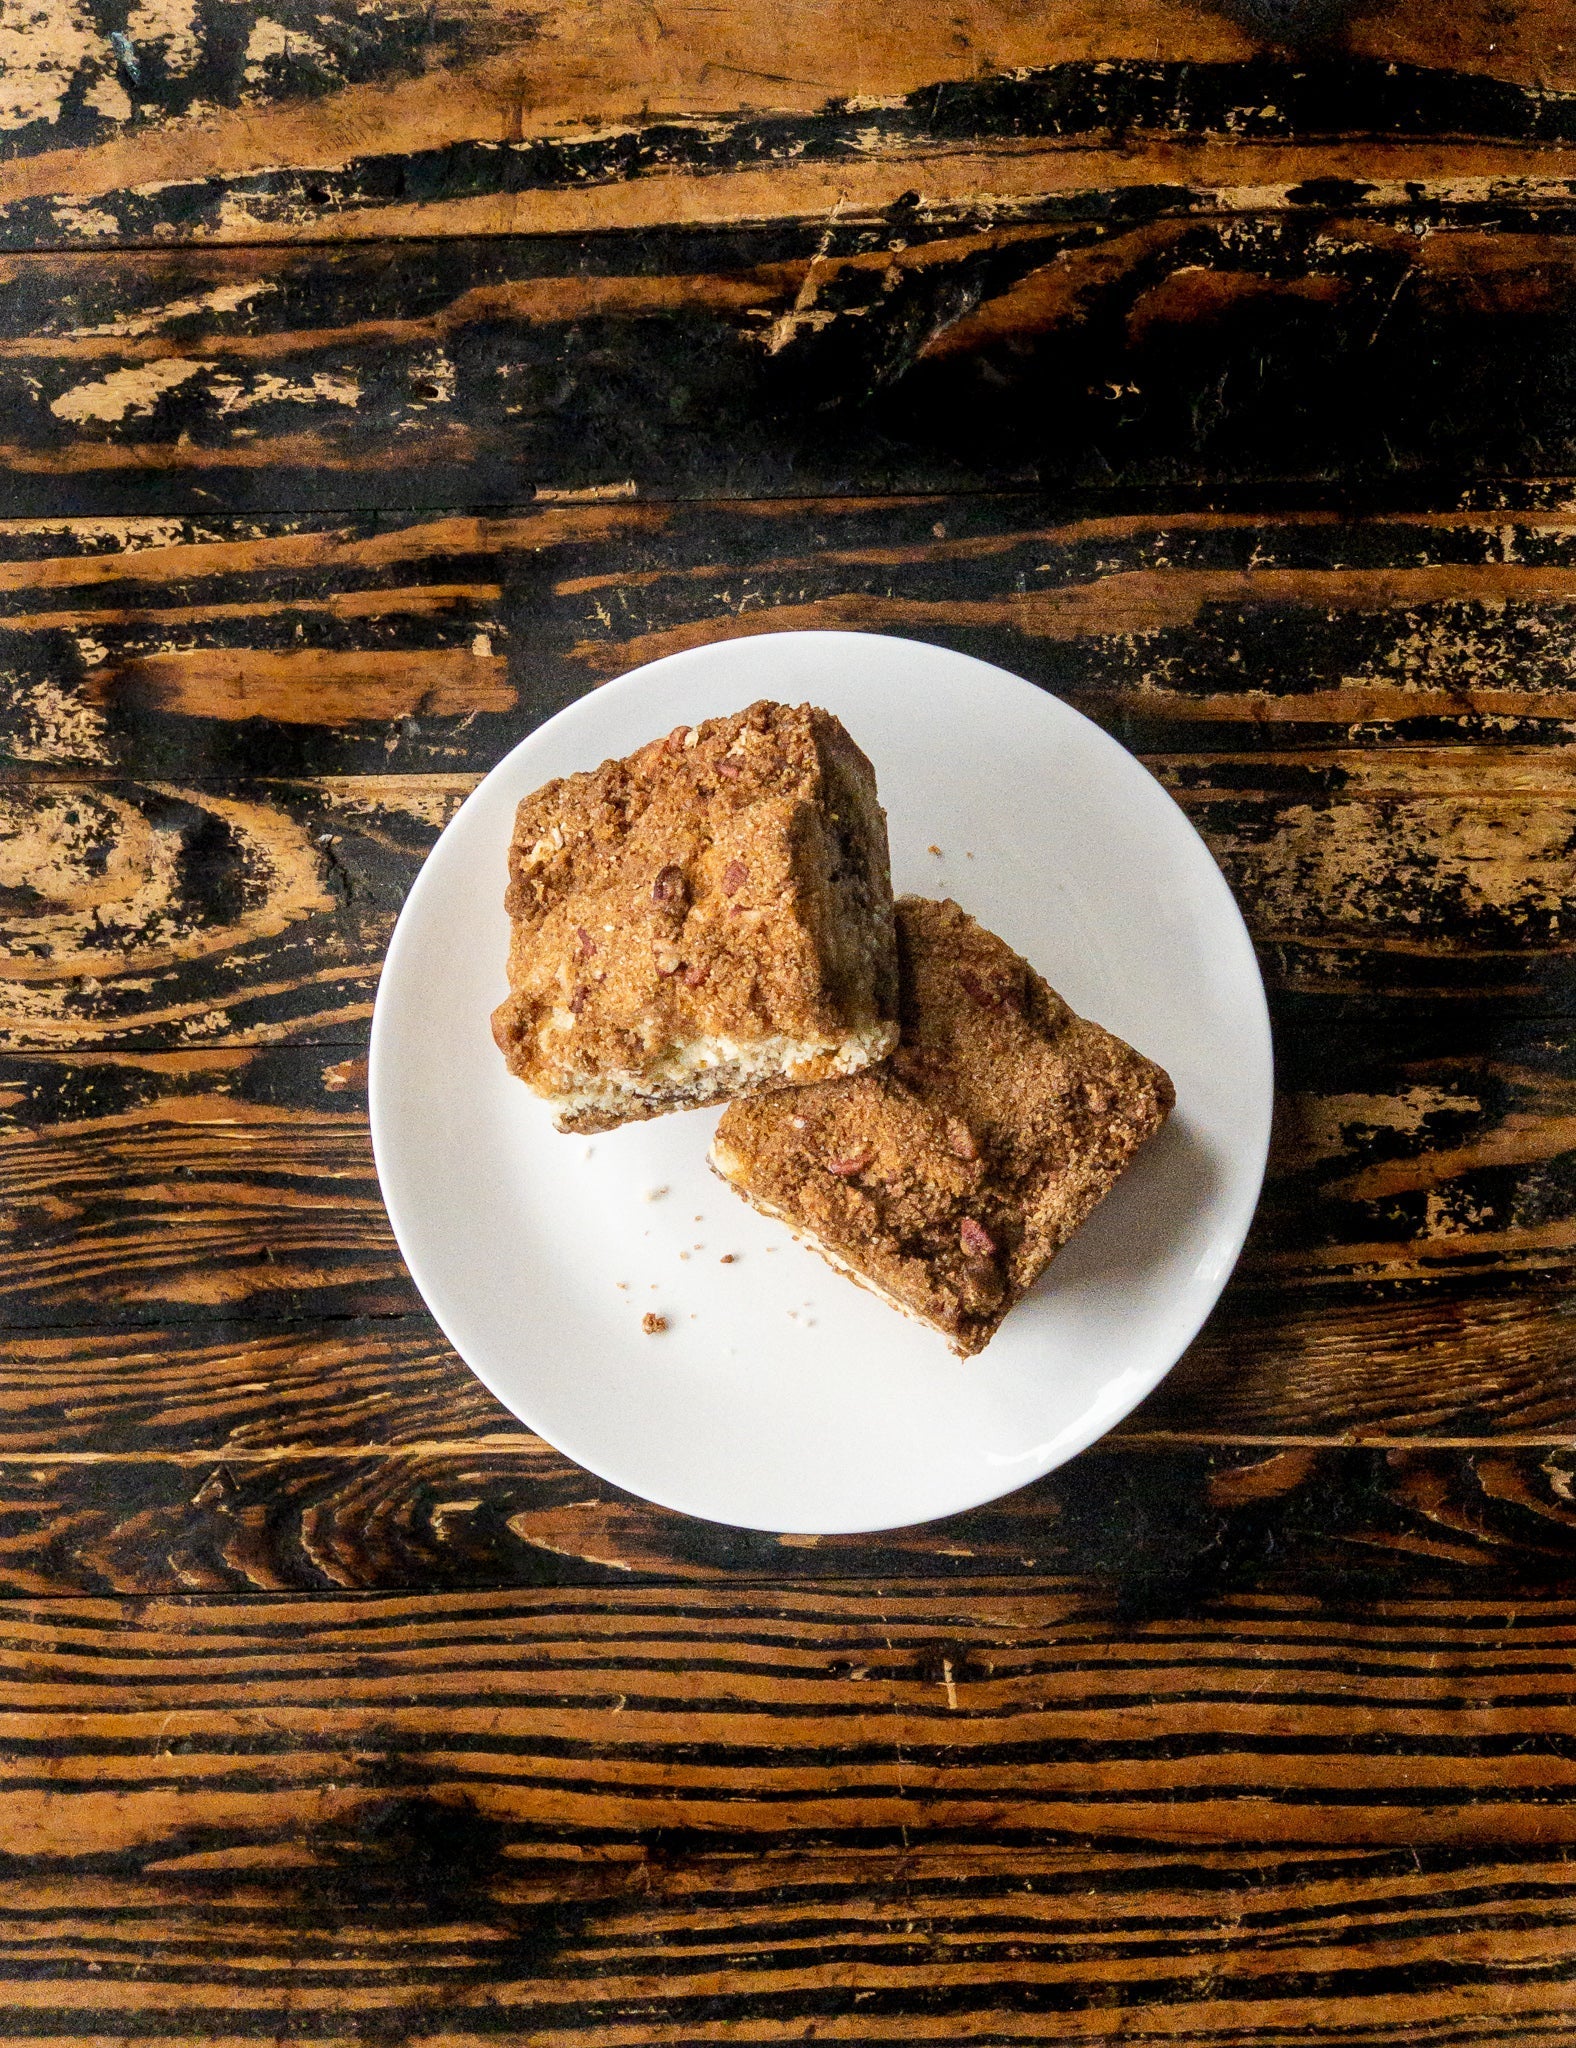 Famous Pecan Coffee Cake Baked Goods - The Meeting Place on Market